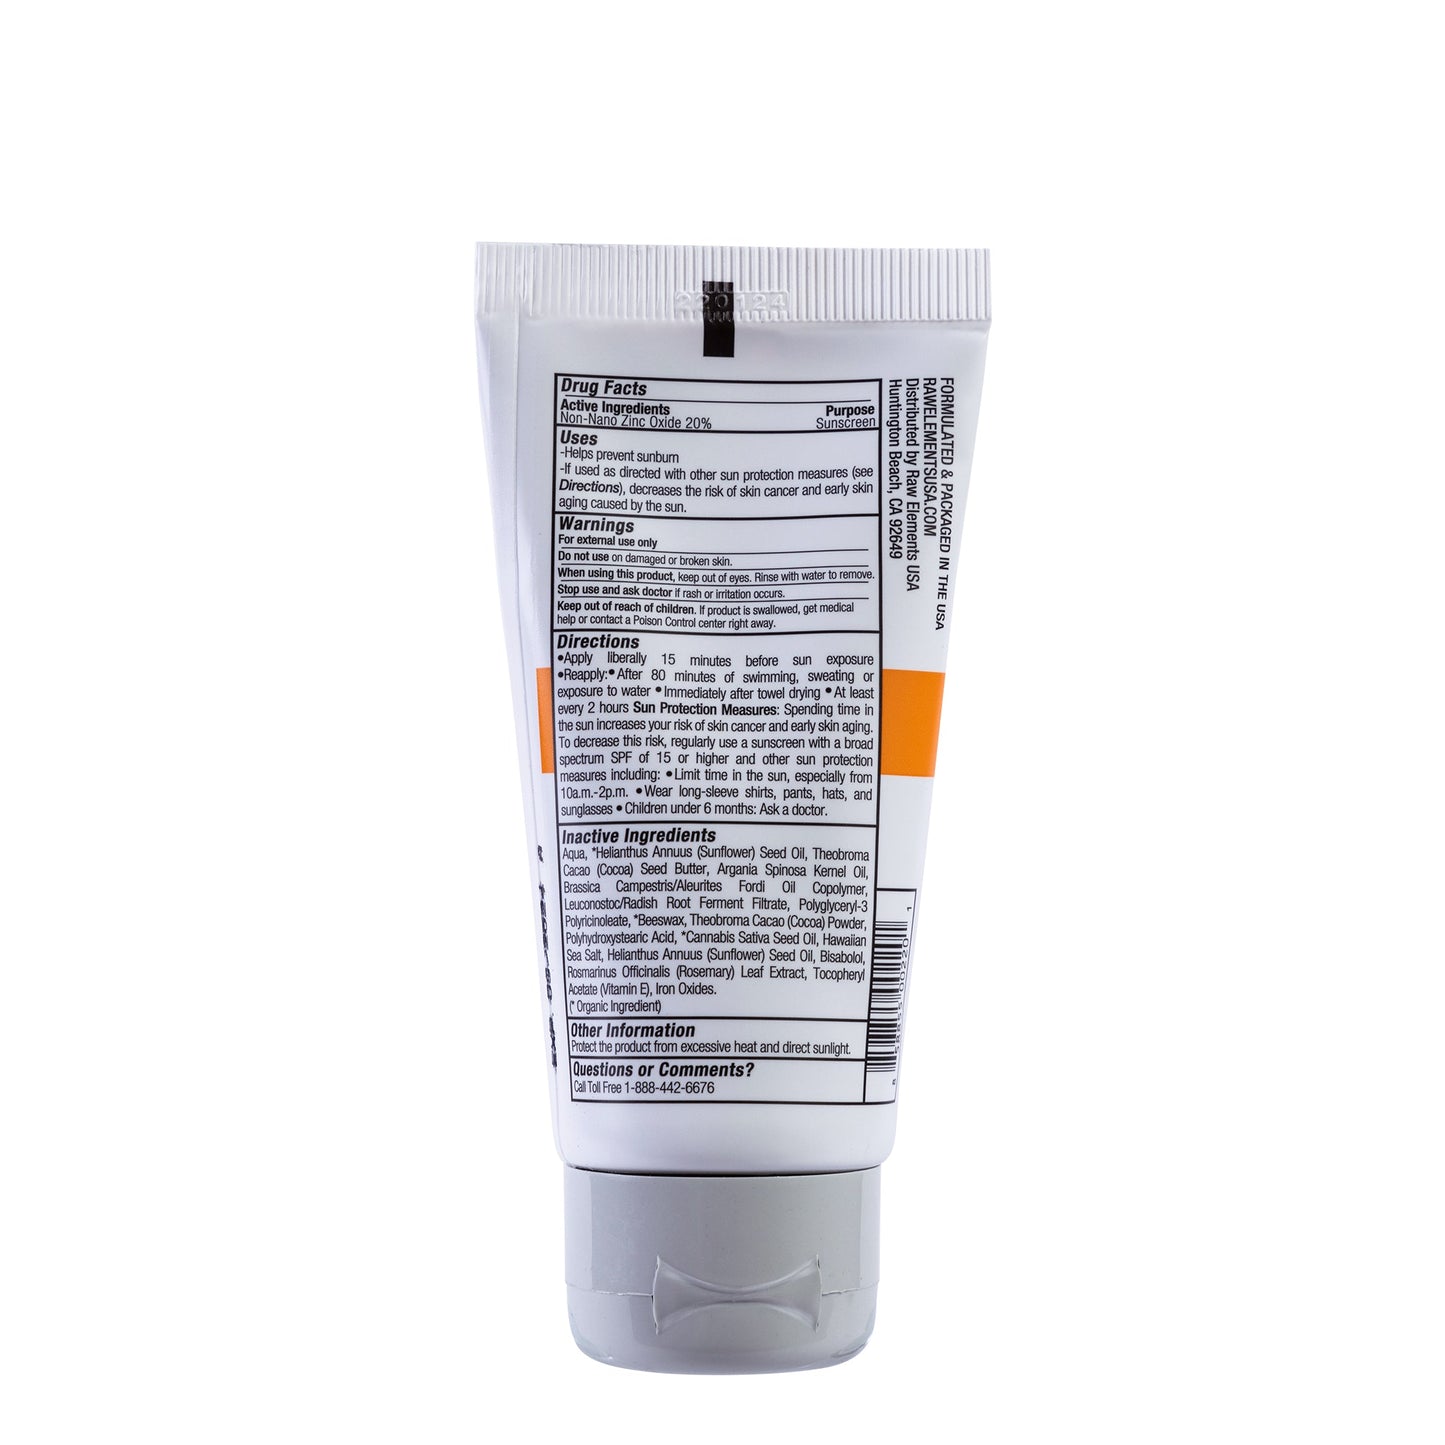 Raw Elements Daily Face Tinted Mineral Sunscreen SPF 30, 1.8 fl. oz.